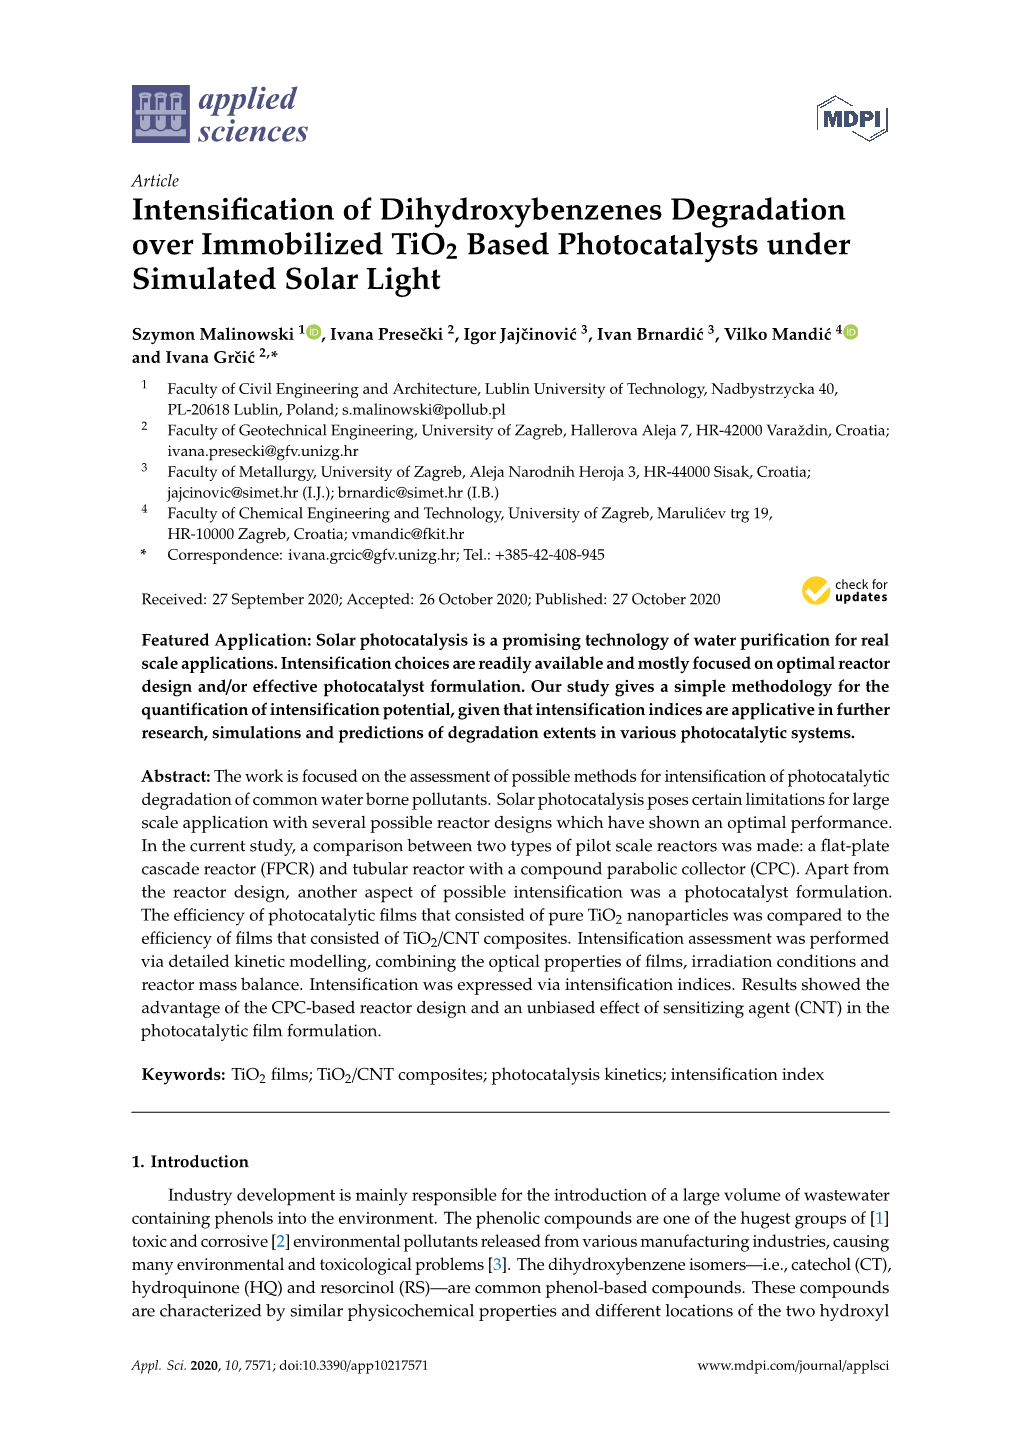 Intensification of Dihydroxybenzenes Degradation Over Immobilized Tio2 Based Photocatalysts Under Simulated Solar Light